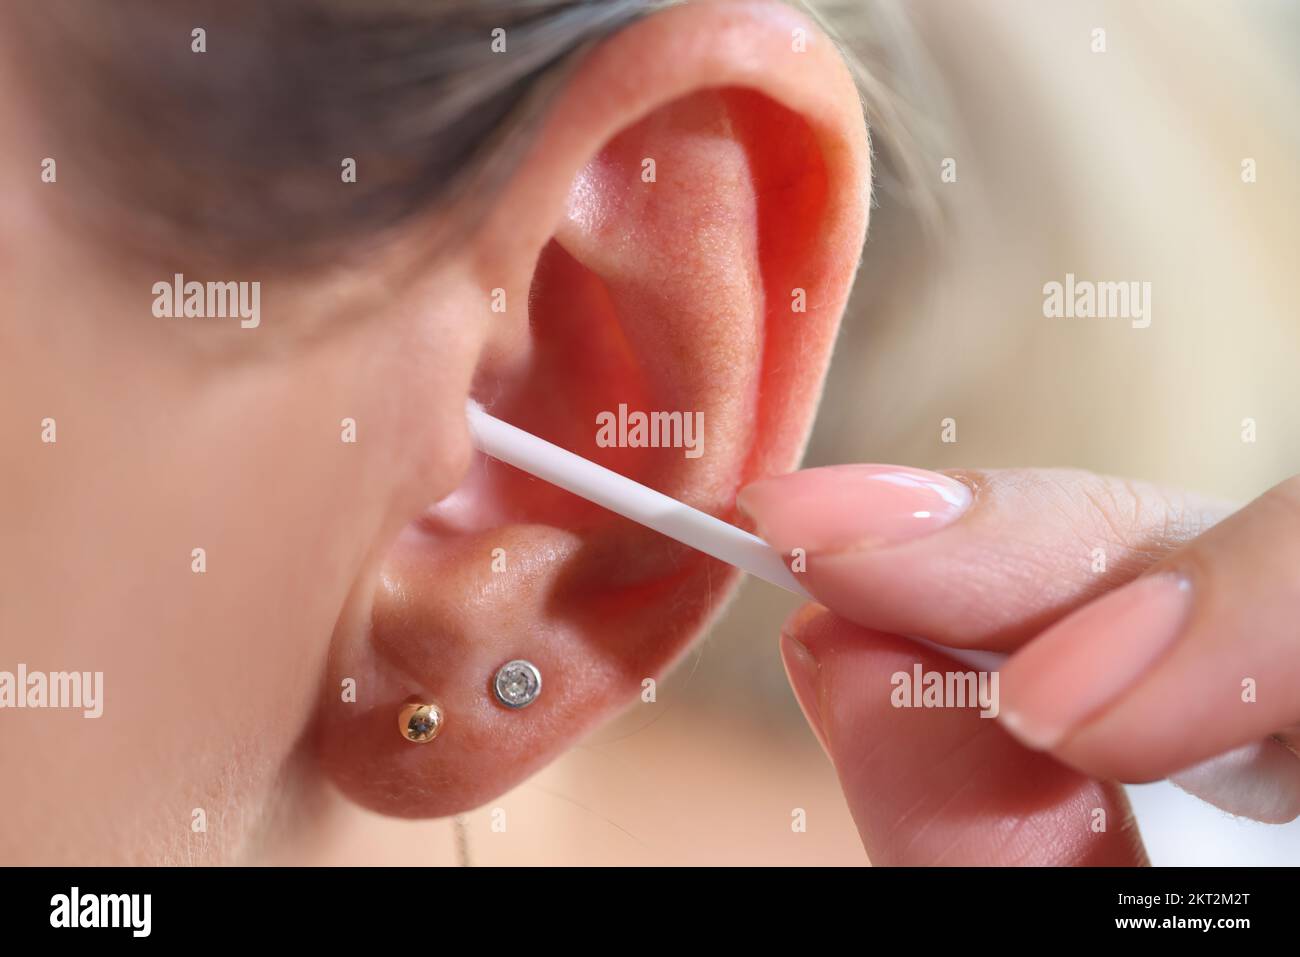 Woman cleaning her ear with cotton swab, people hygiene concept. Stock Photo